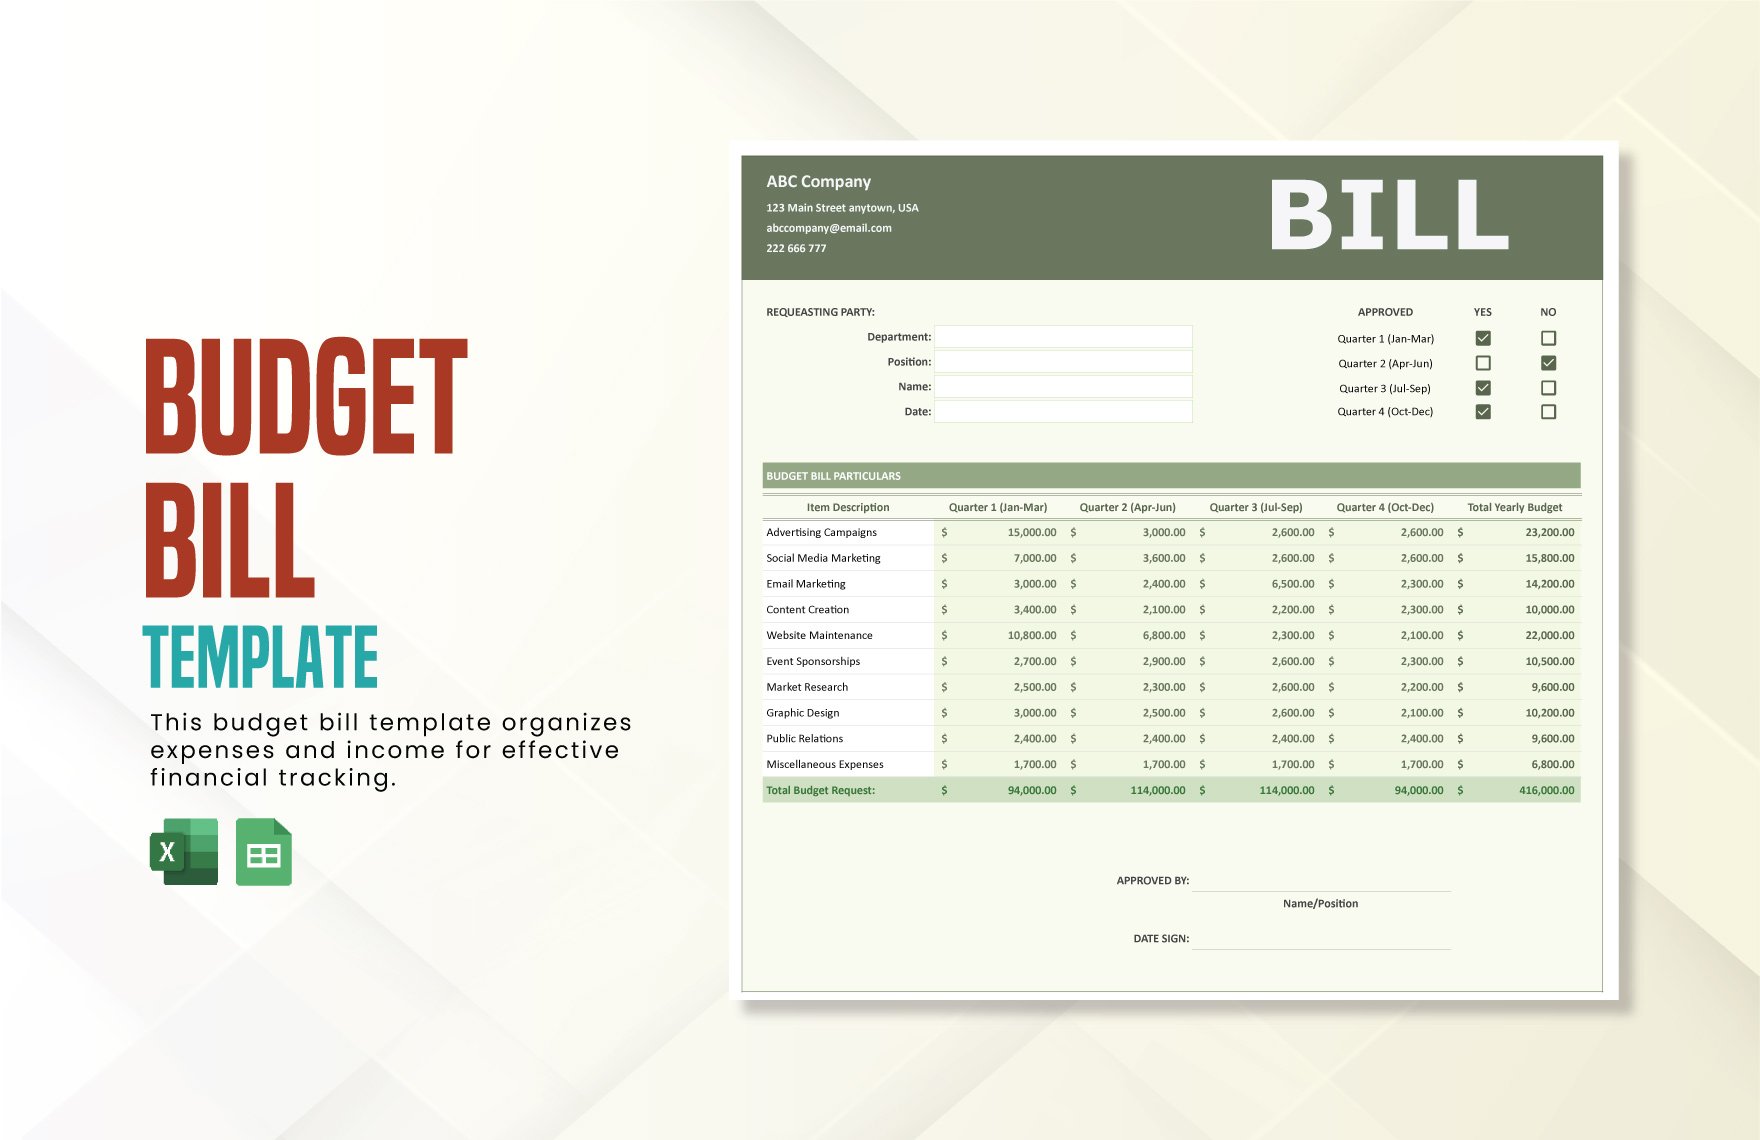 Budget Bill Template in Excel, Google Sheets